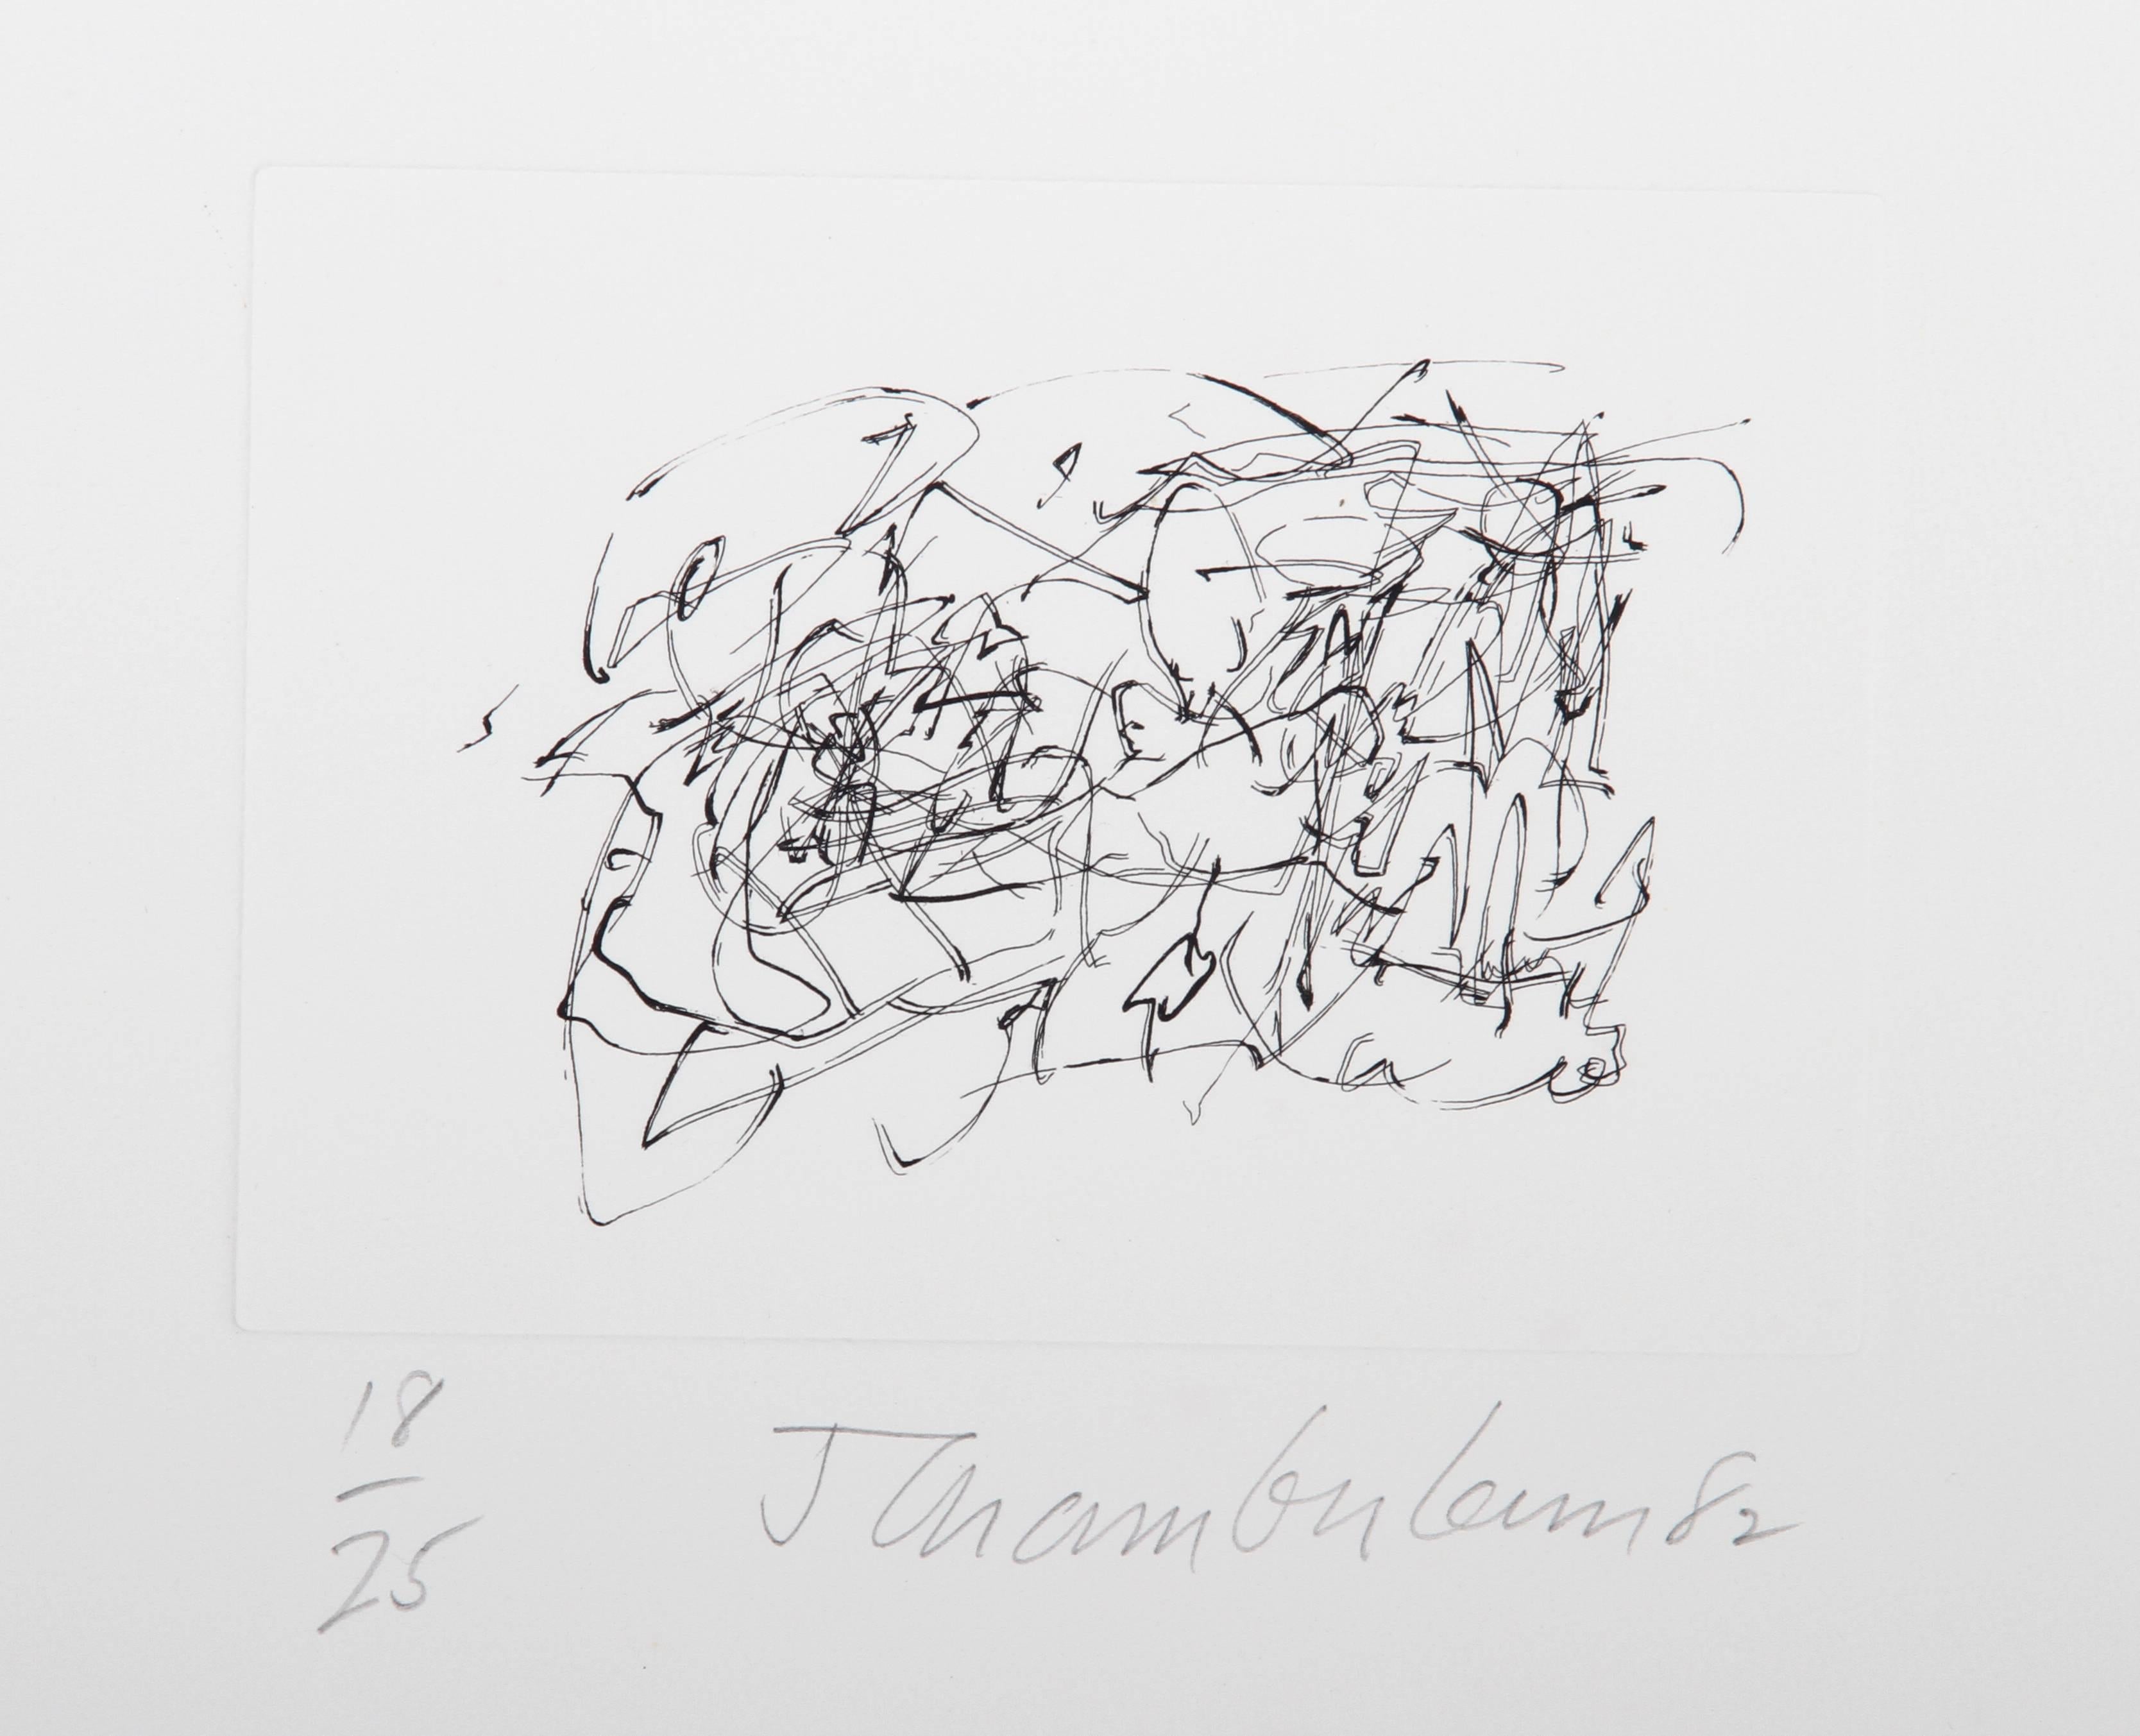 Artist: John Chamberlain, American (1927 - 2011)
Title: Ten Coconut Portfolio
Year: 1982
Medium: Portfolio of Six Etchings, each signed and numbered in pencil
Edition: 25
Image Size: 5 x 7 inches
Size: 17 x 15 in. (43.18 x 38.1 cm)

In portfolio box